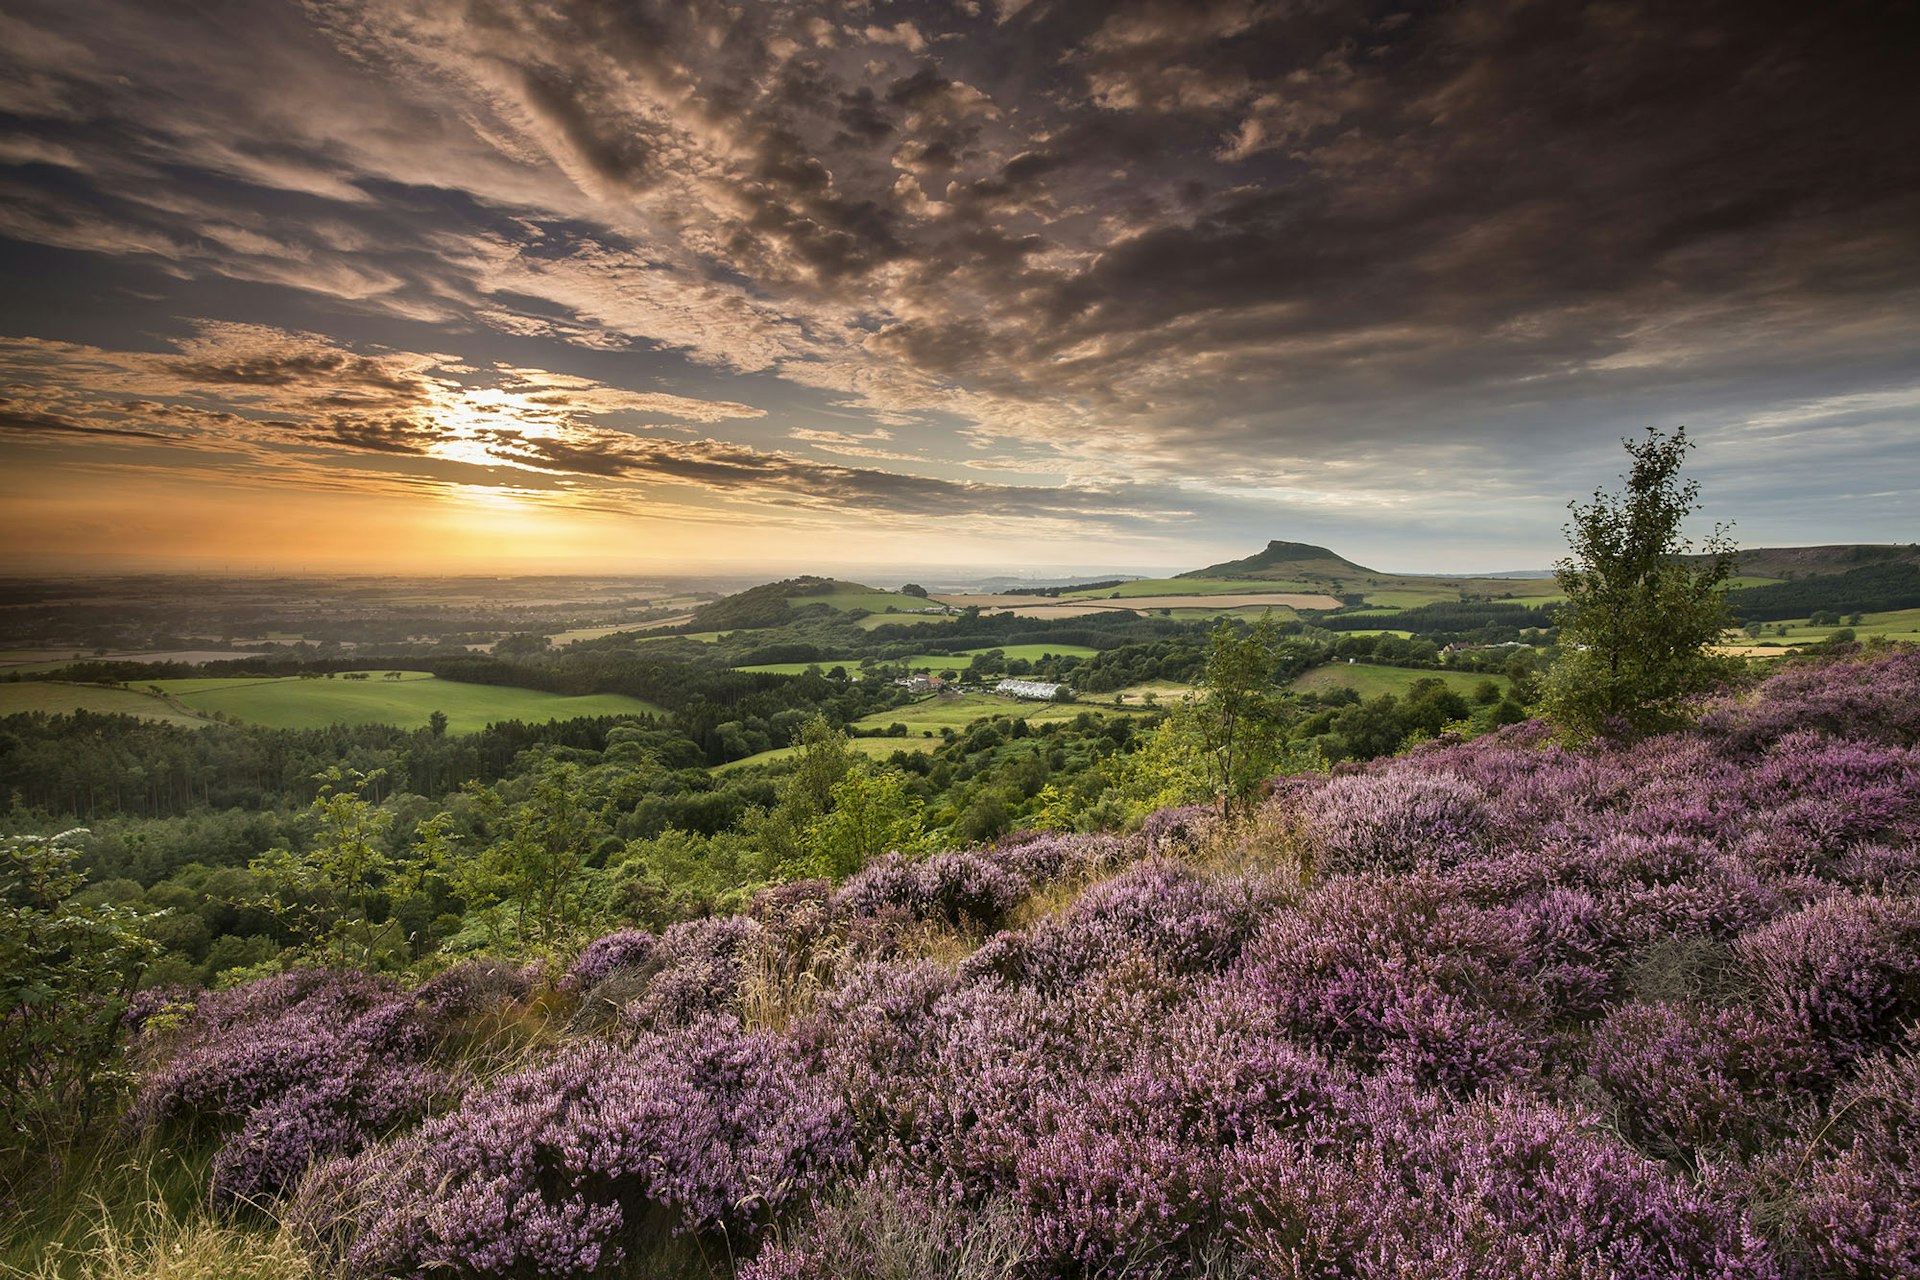 The sun sets lighting up the grey clouds in the sky. There's purple heather in the foreground, and uninterrupted countryside stretching into the distance